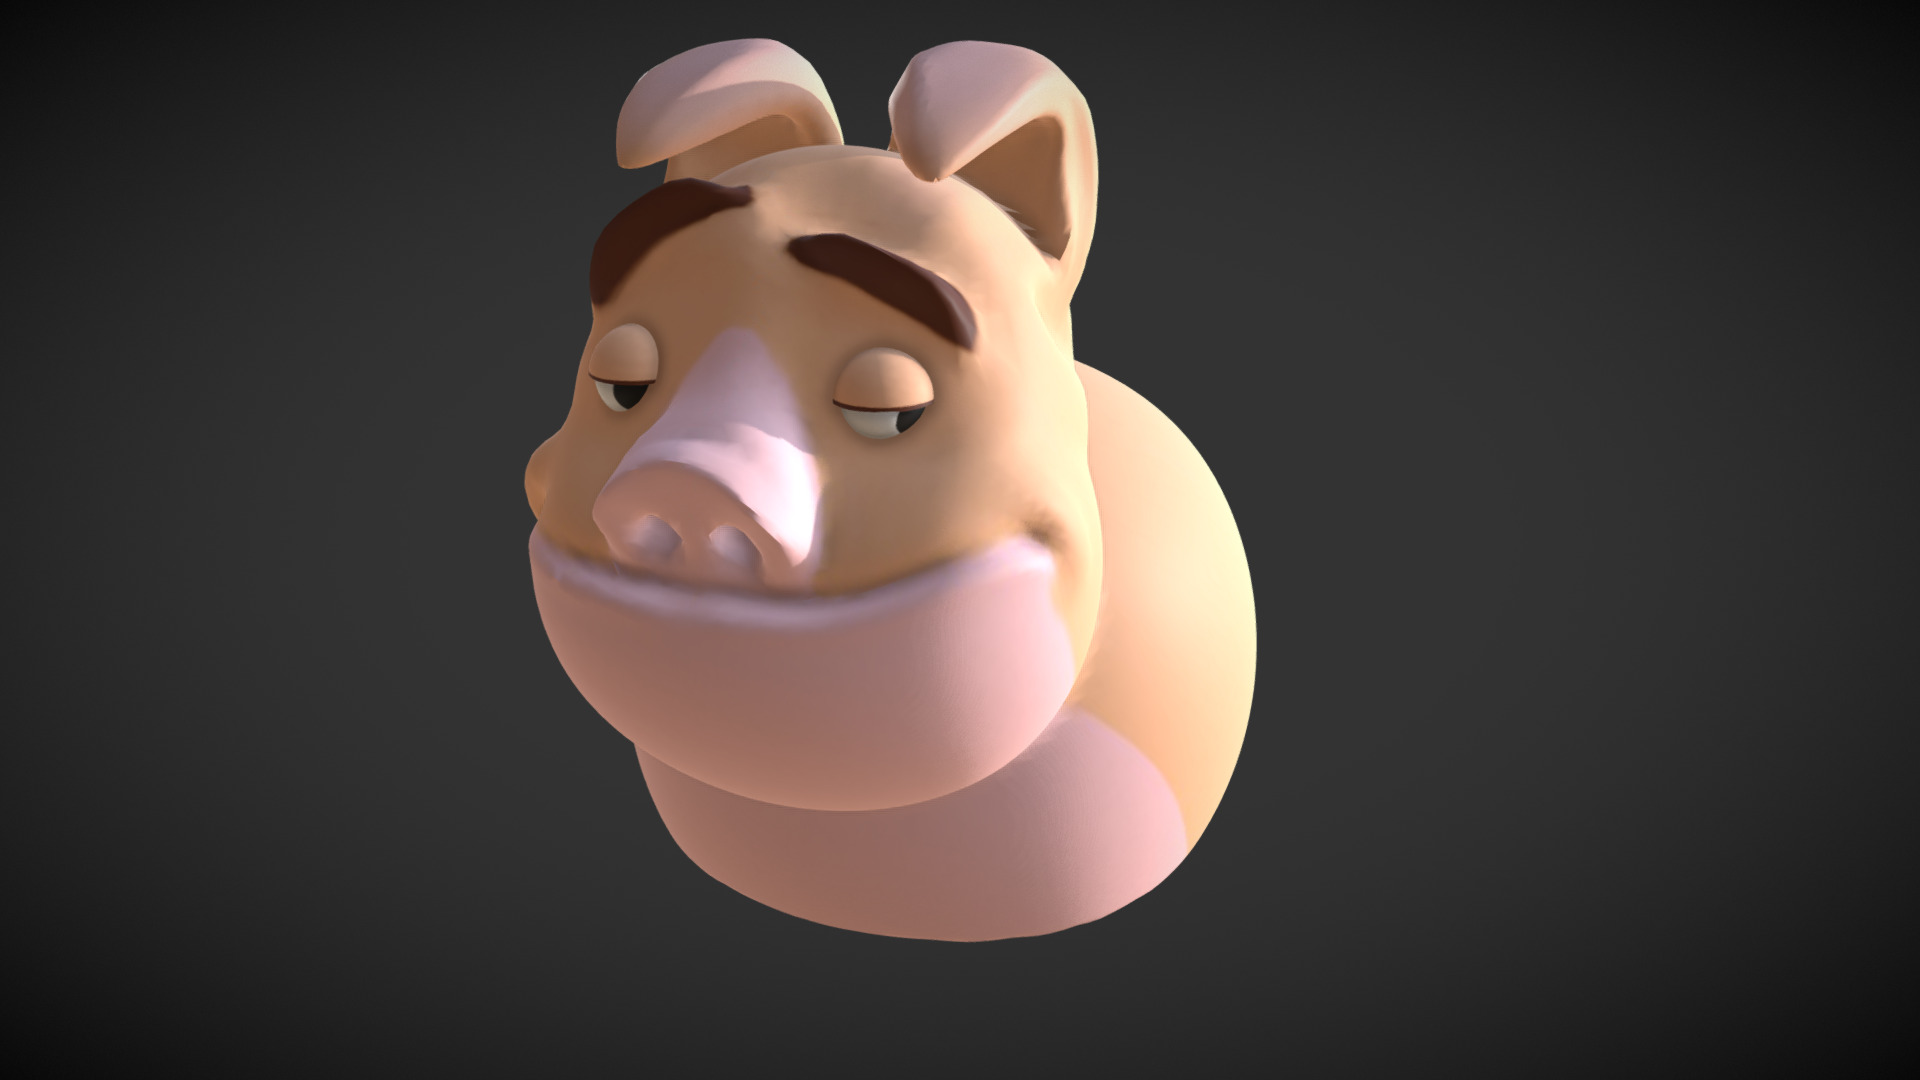 3D model Pig - This is a 3D model of the Pig. The 3D model is about a pink cartoon character.